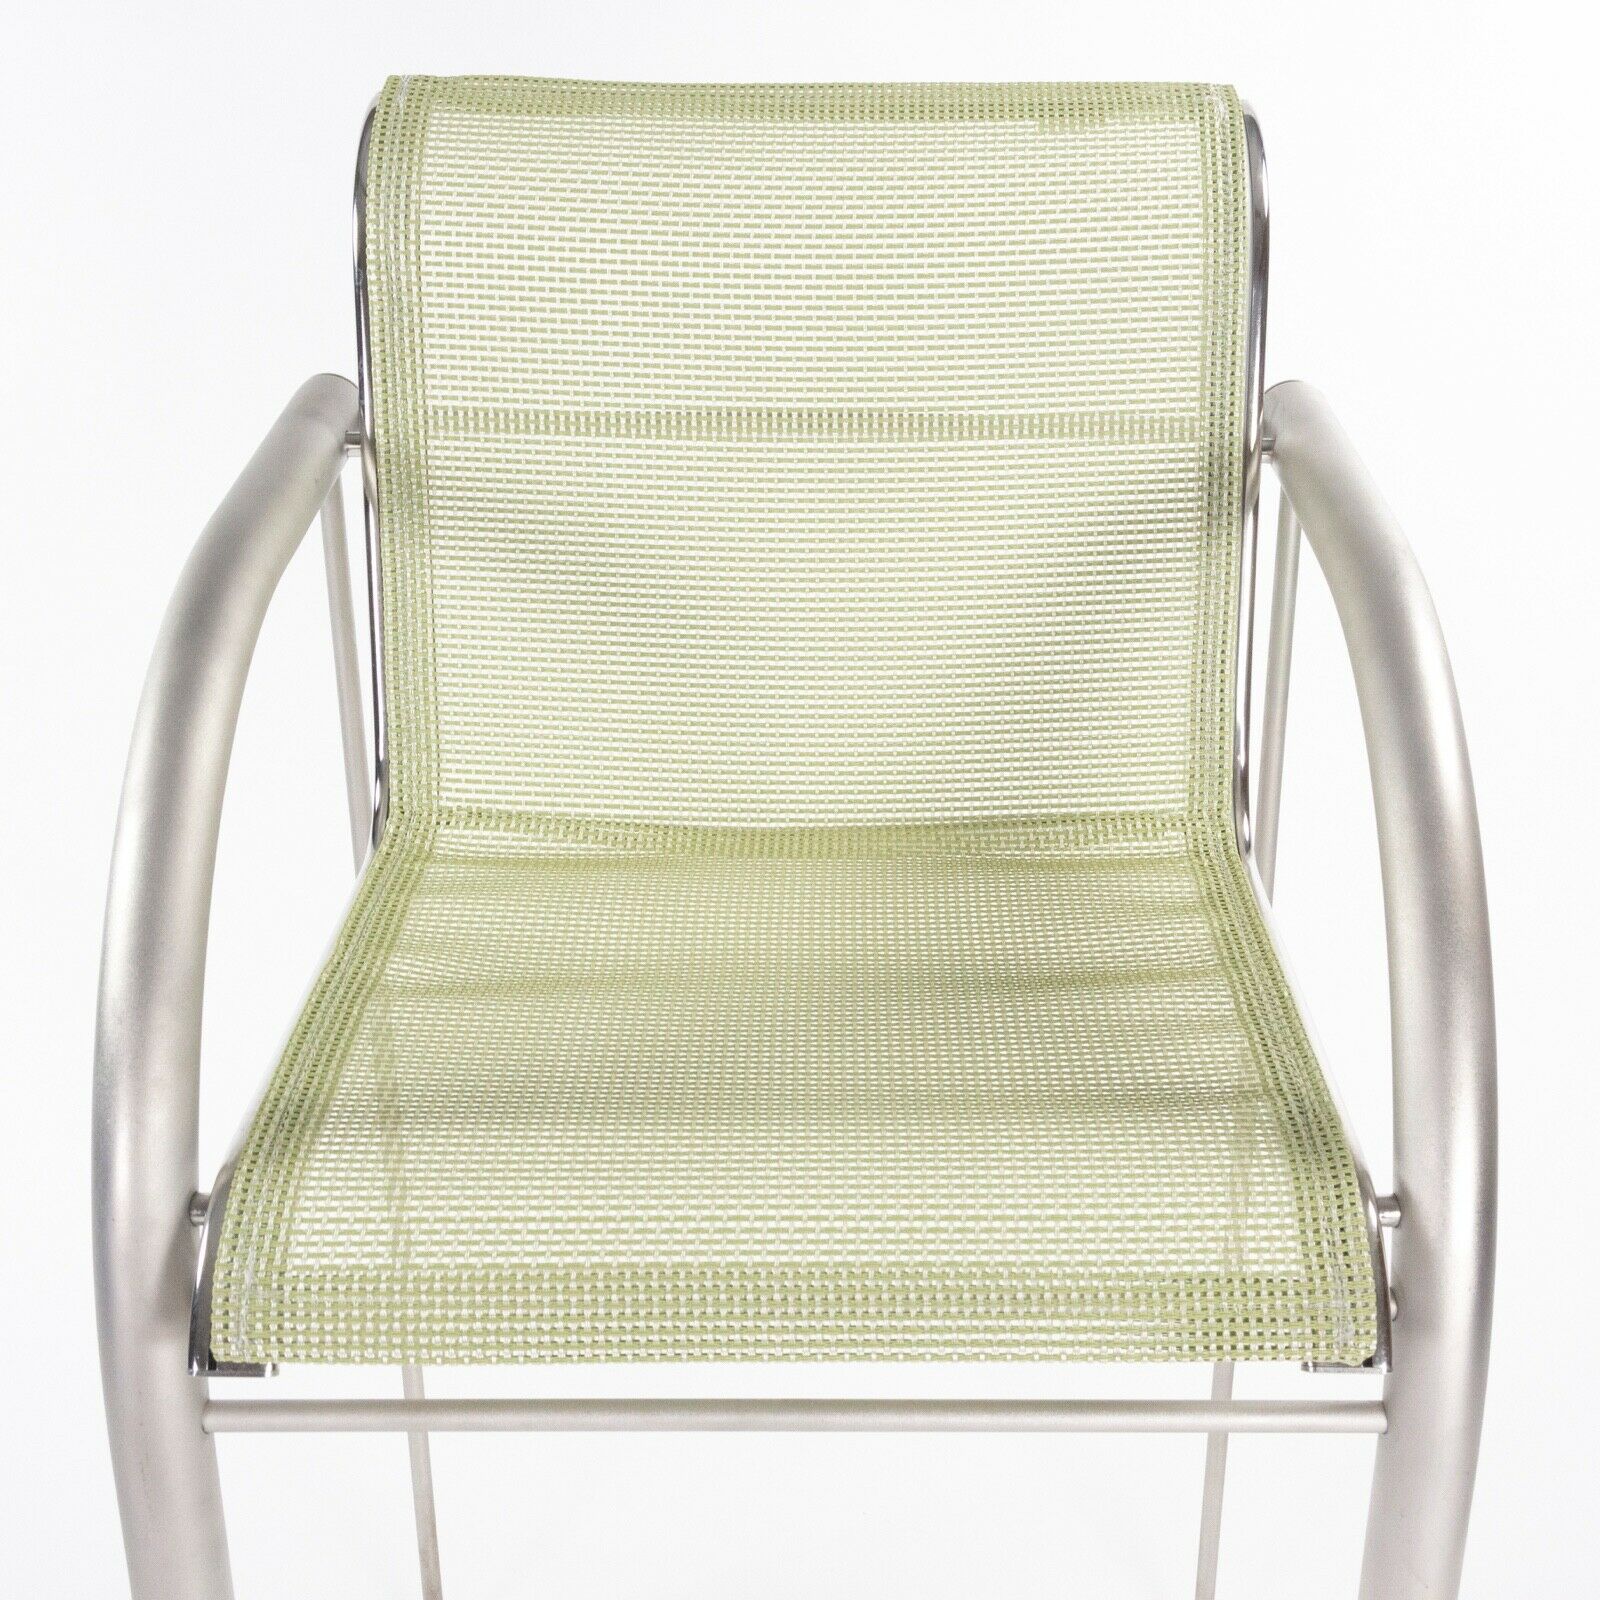 Prototype Richard Schultz 2002 Collection Stainless Bar Stool with Outdoor Mesh